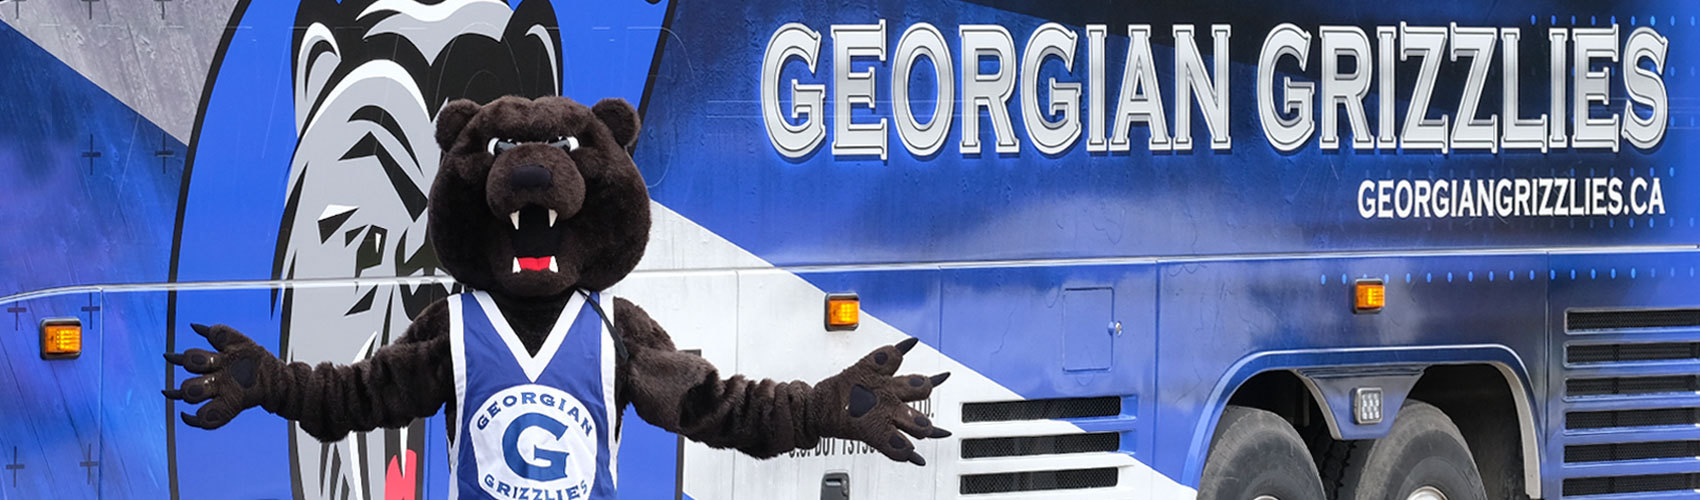 Georgian Grizzly standing beside Georgian Grizzly wrapped bus